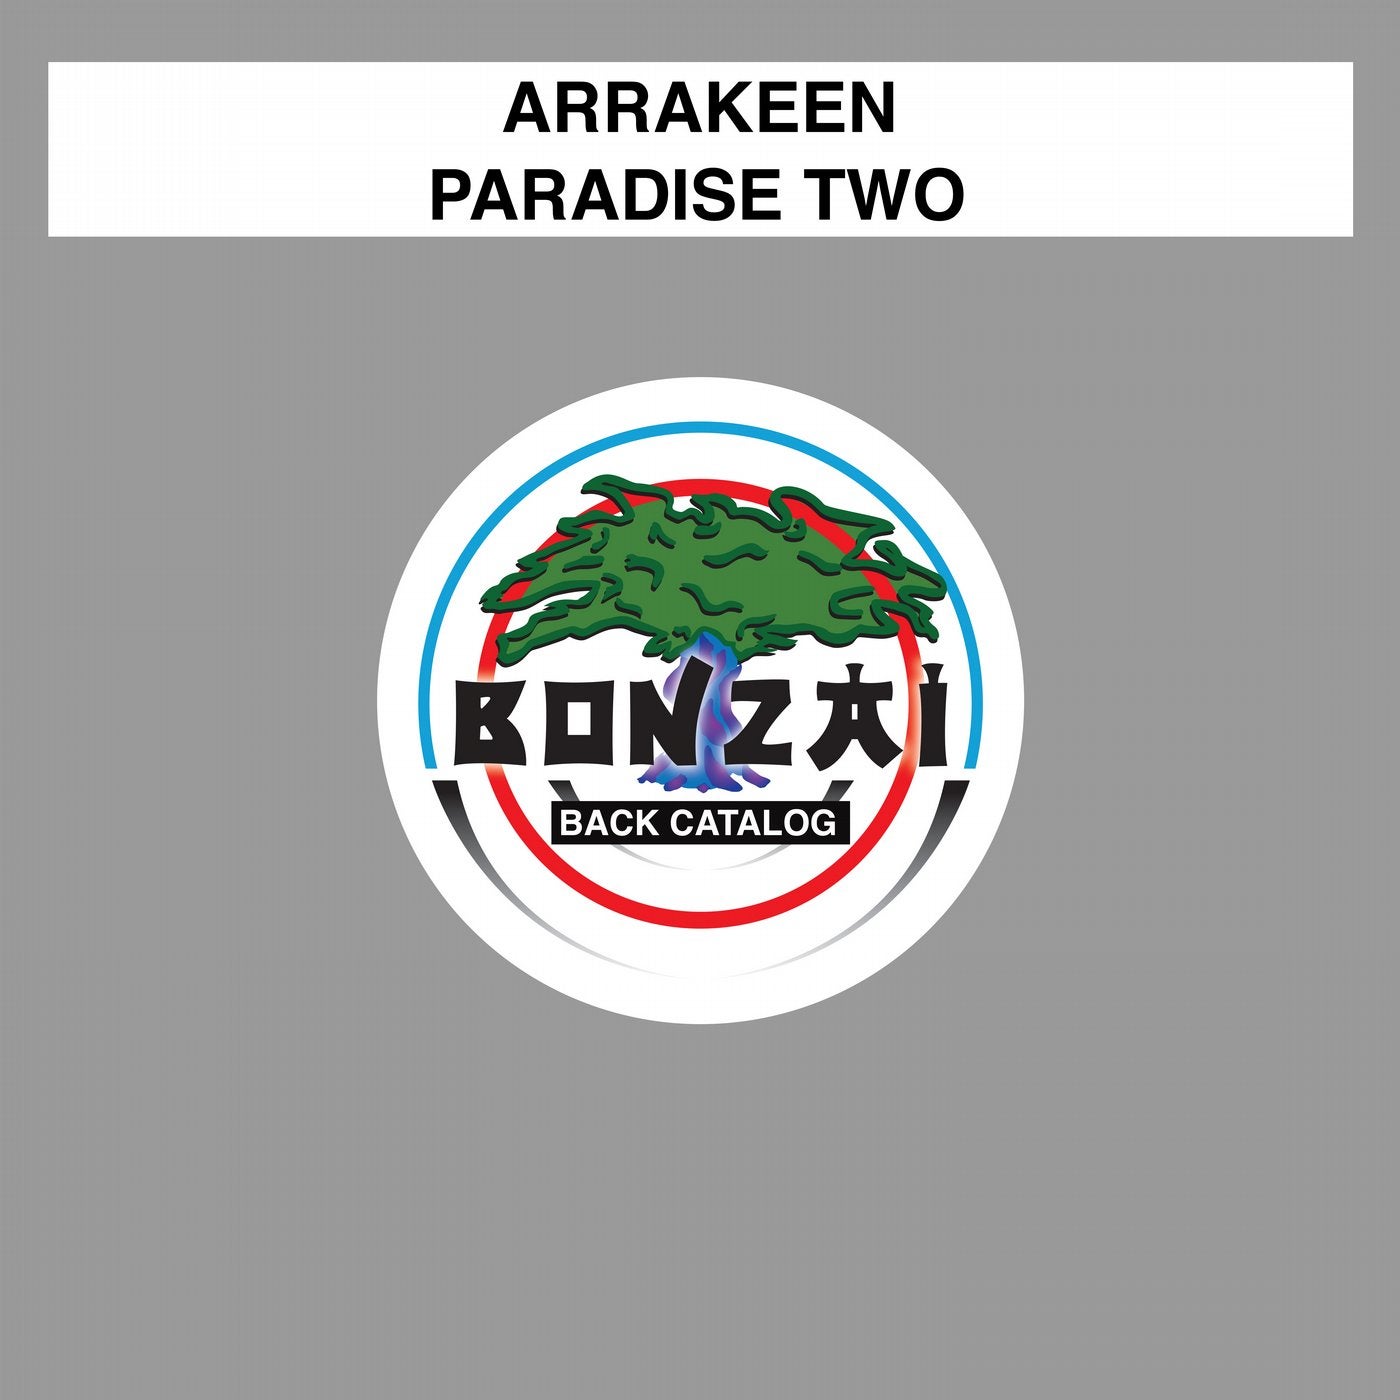 Paradise Two